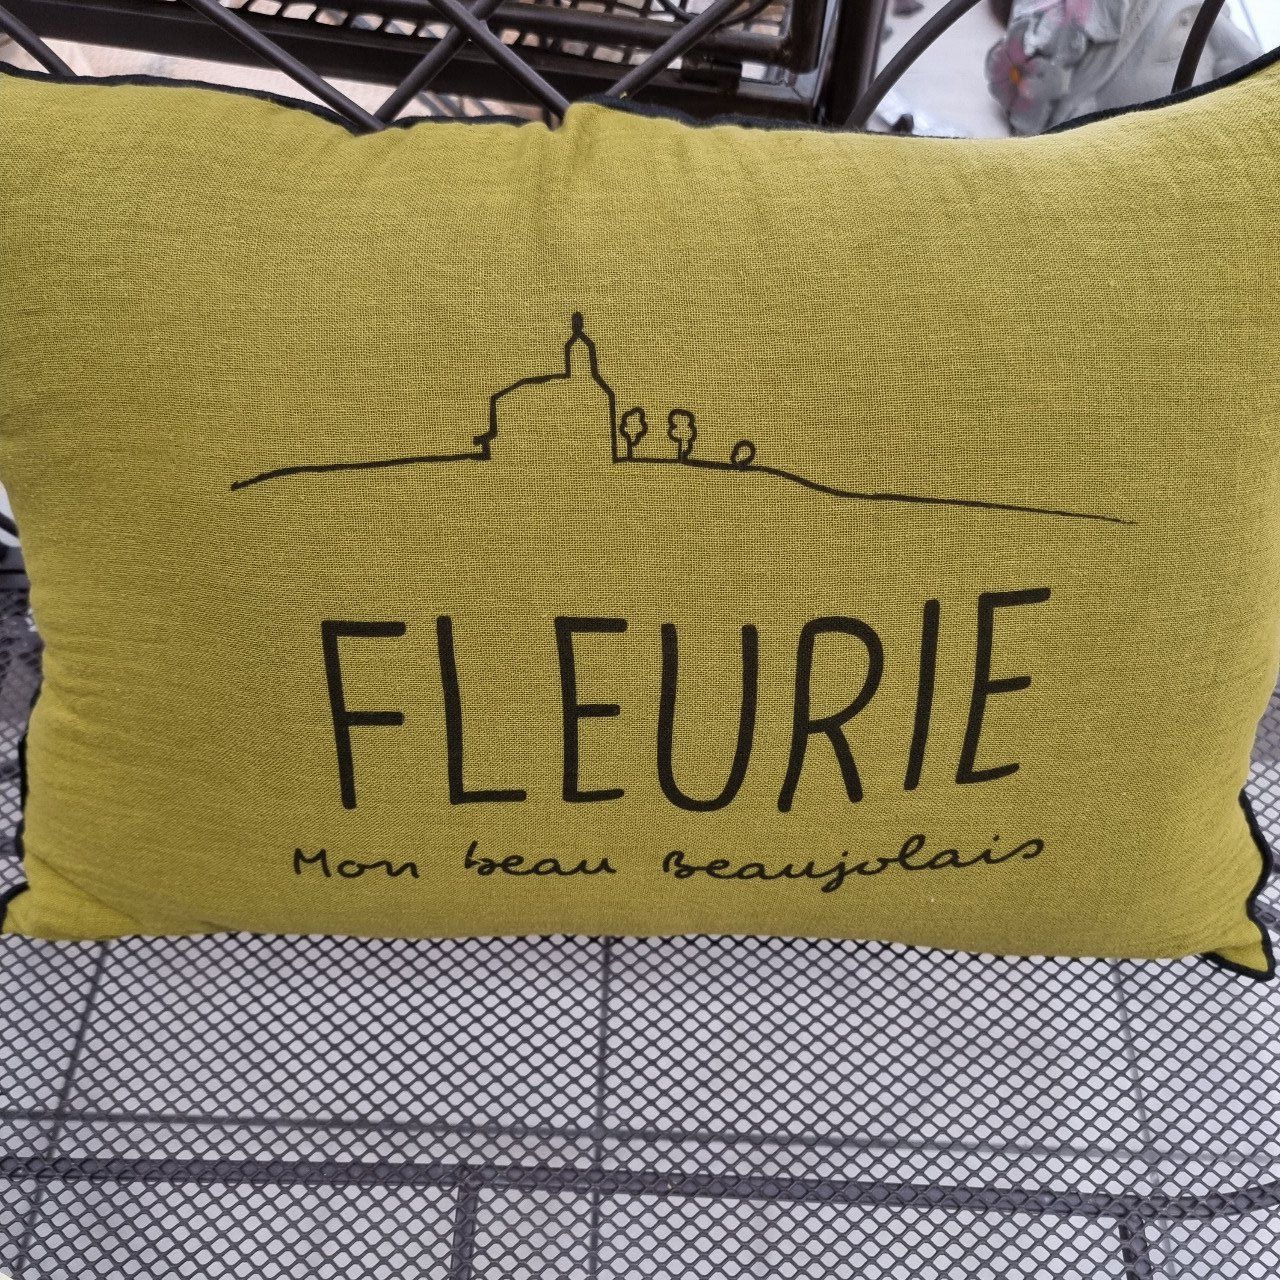 Coussin Fleurie rectangulaire